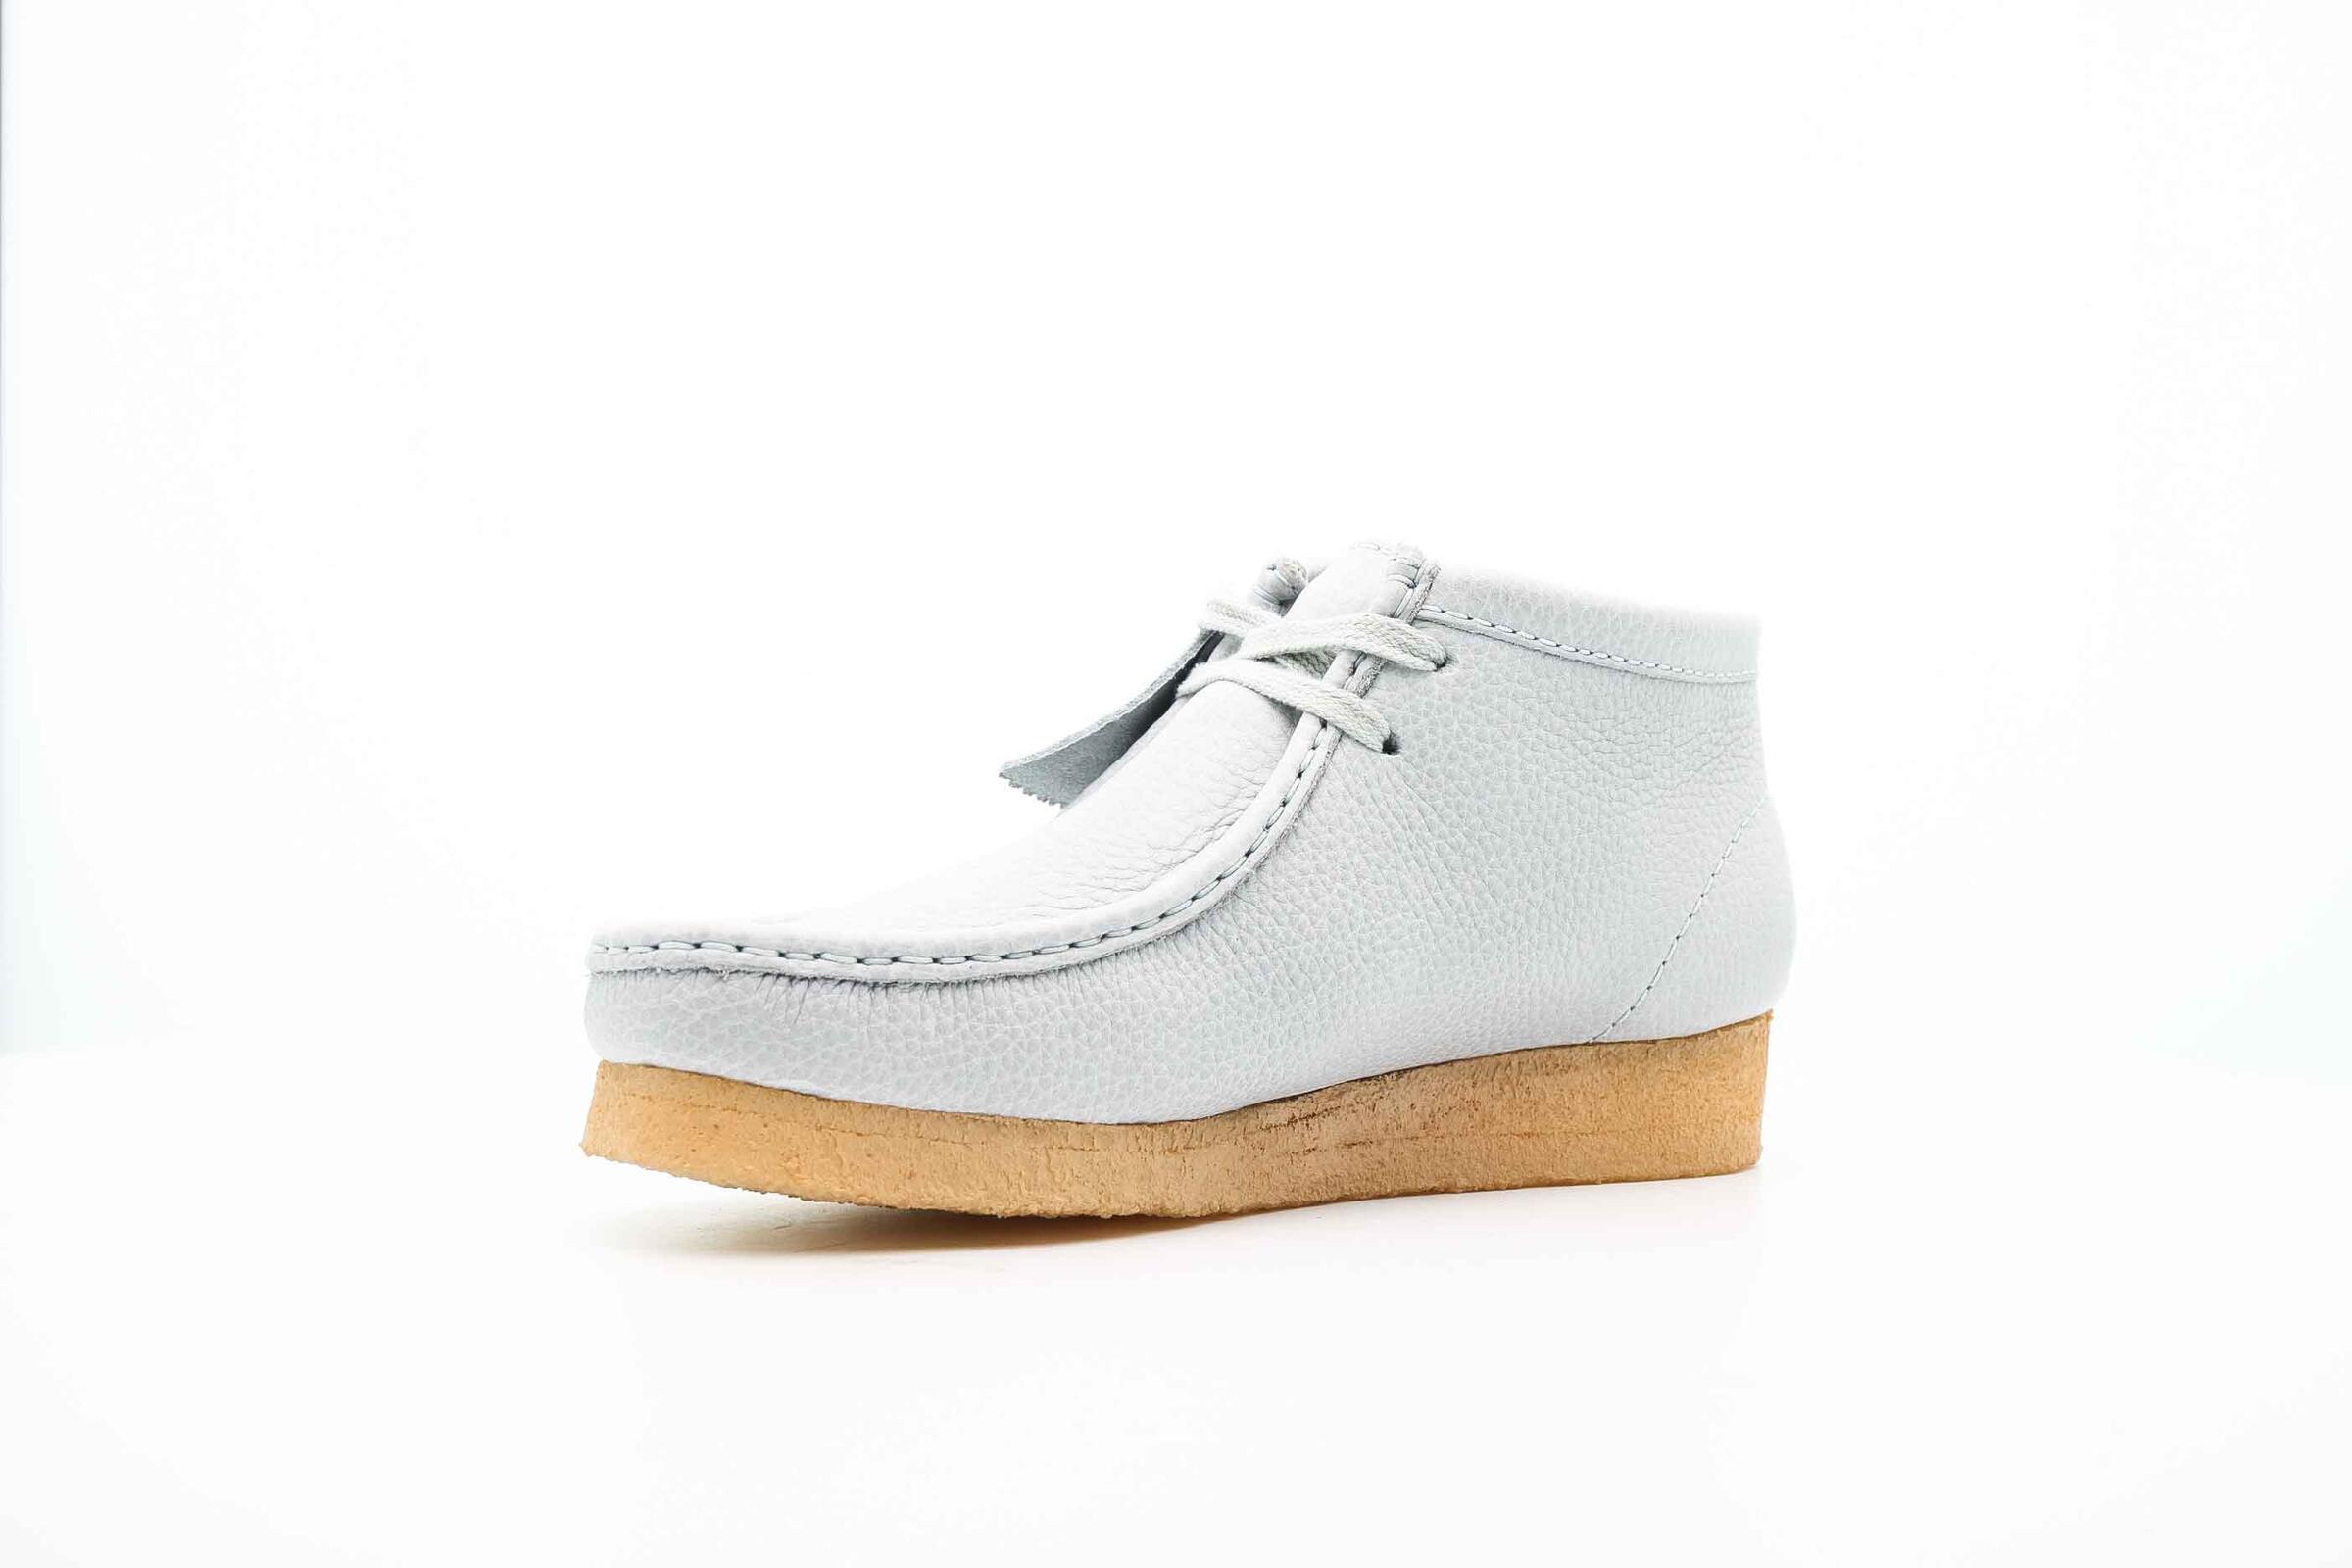 Clarks Originals x SPORTY AND RICH WALLABEE BOOT "LIGHT BLUE"